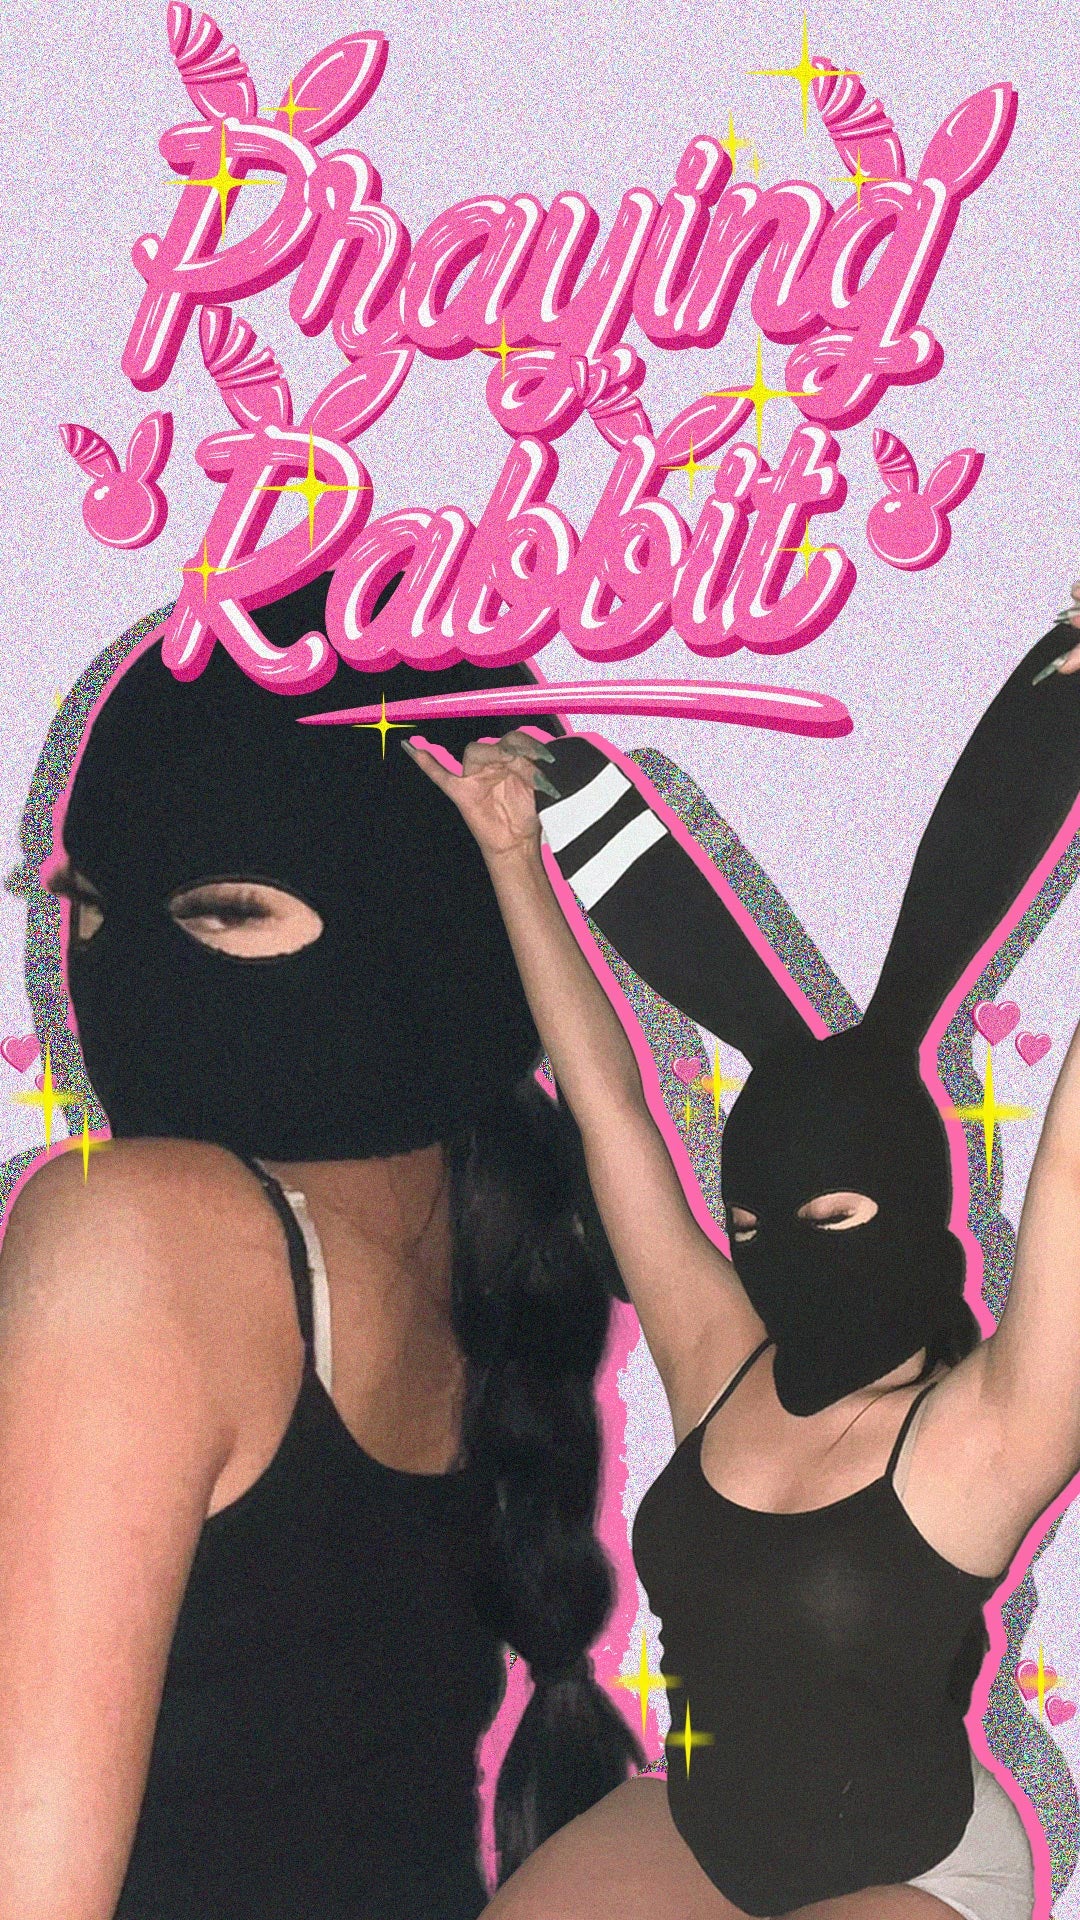 praying rabbit wallpaper of a model wearing a black ski mask with bunny ears